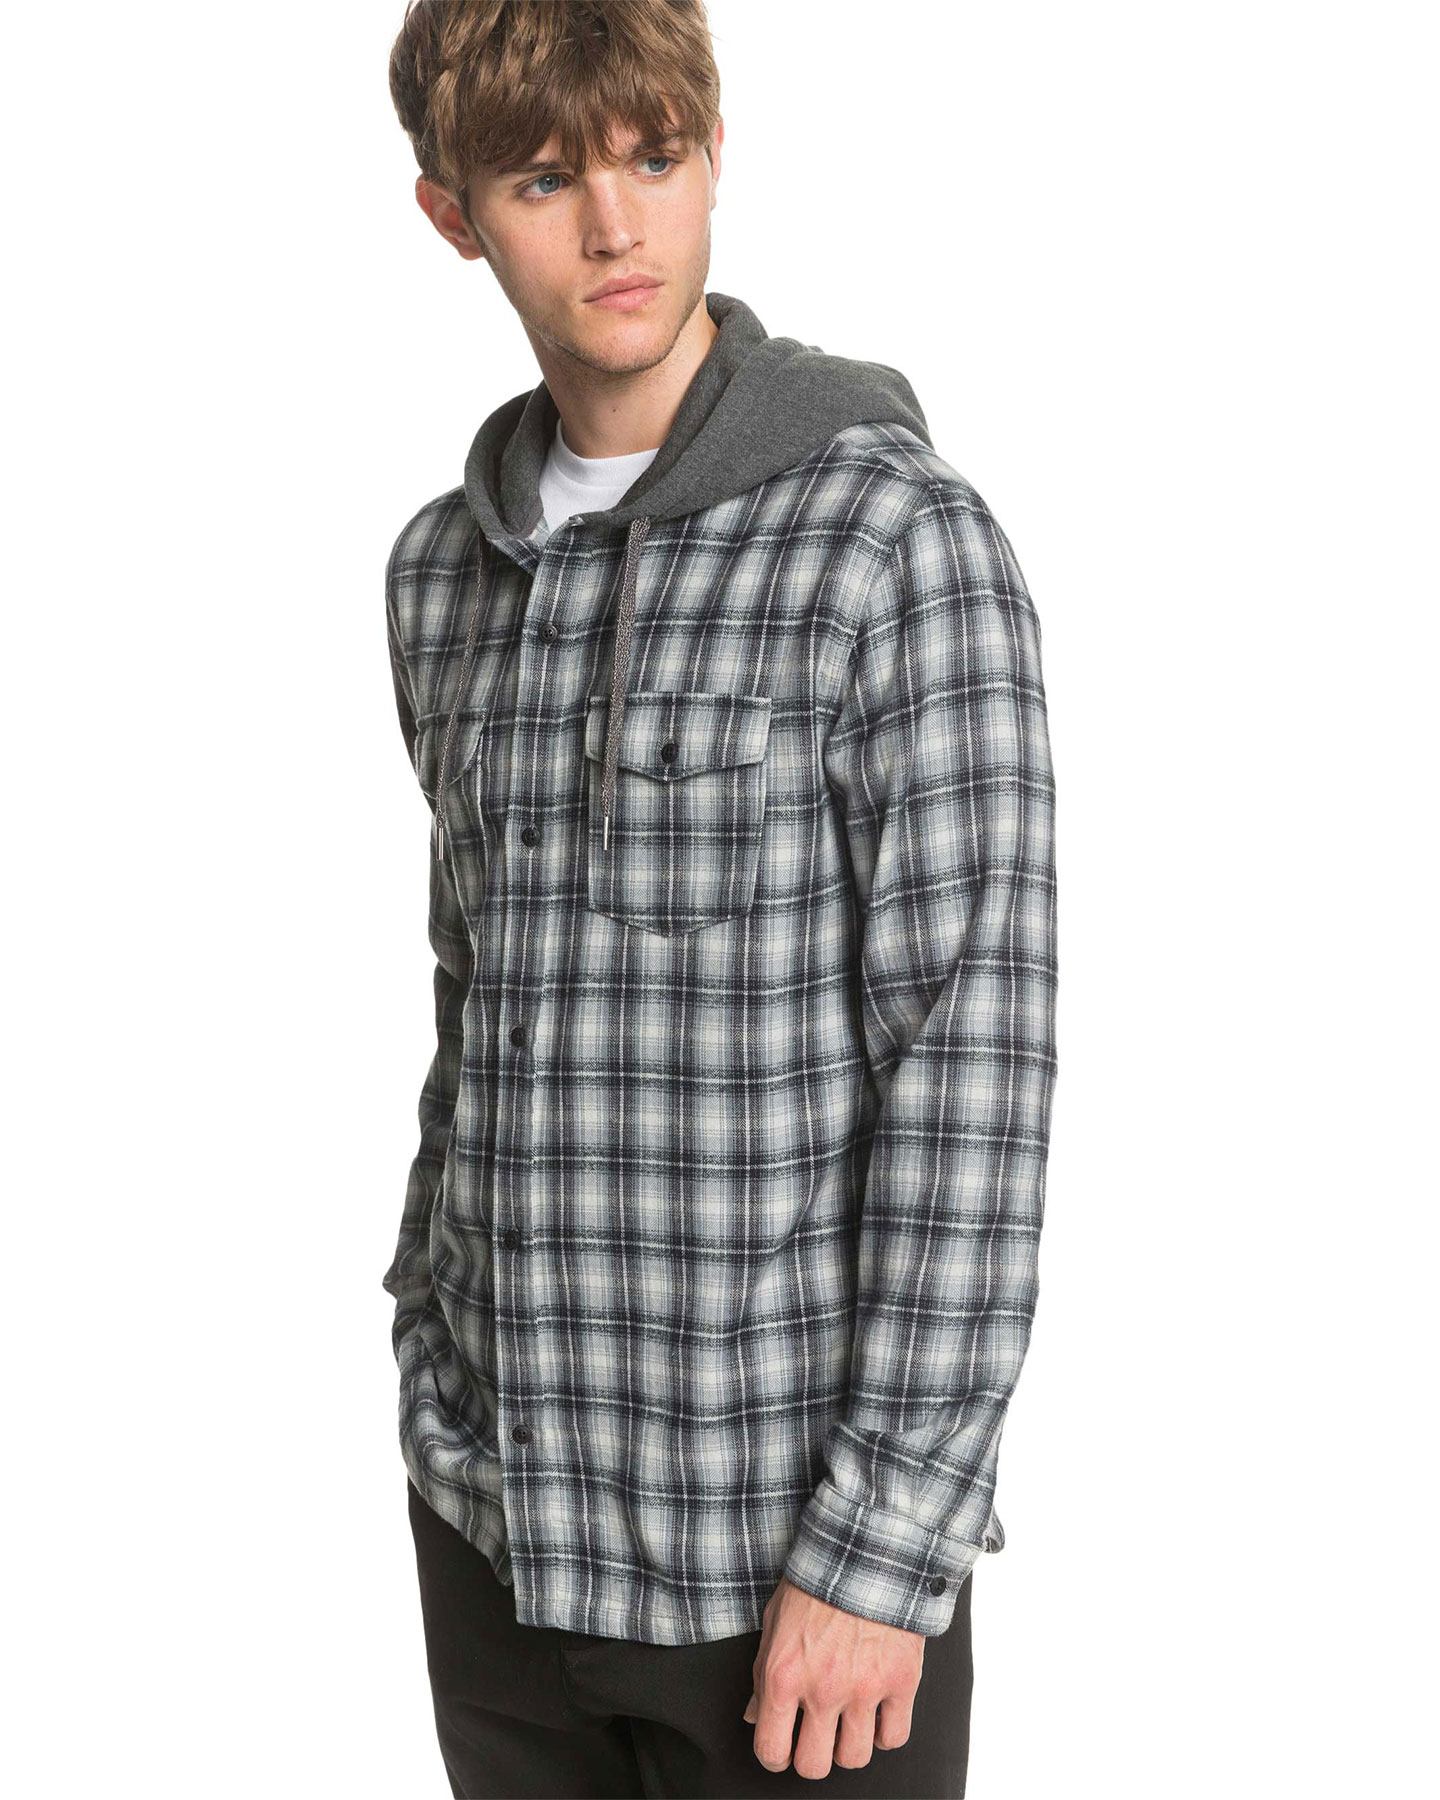 Quiksilver Mens Snap Up Hooded Long Sleeve Shirt - Iron Gate Snap Up ...